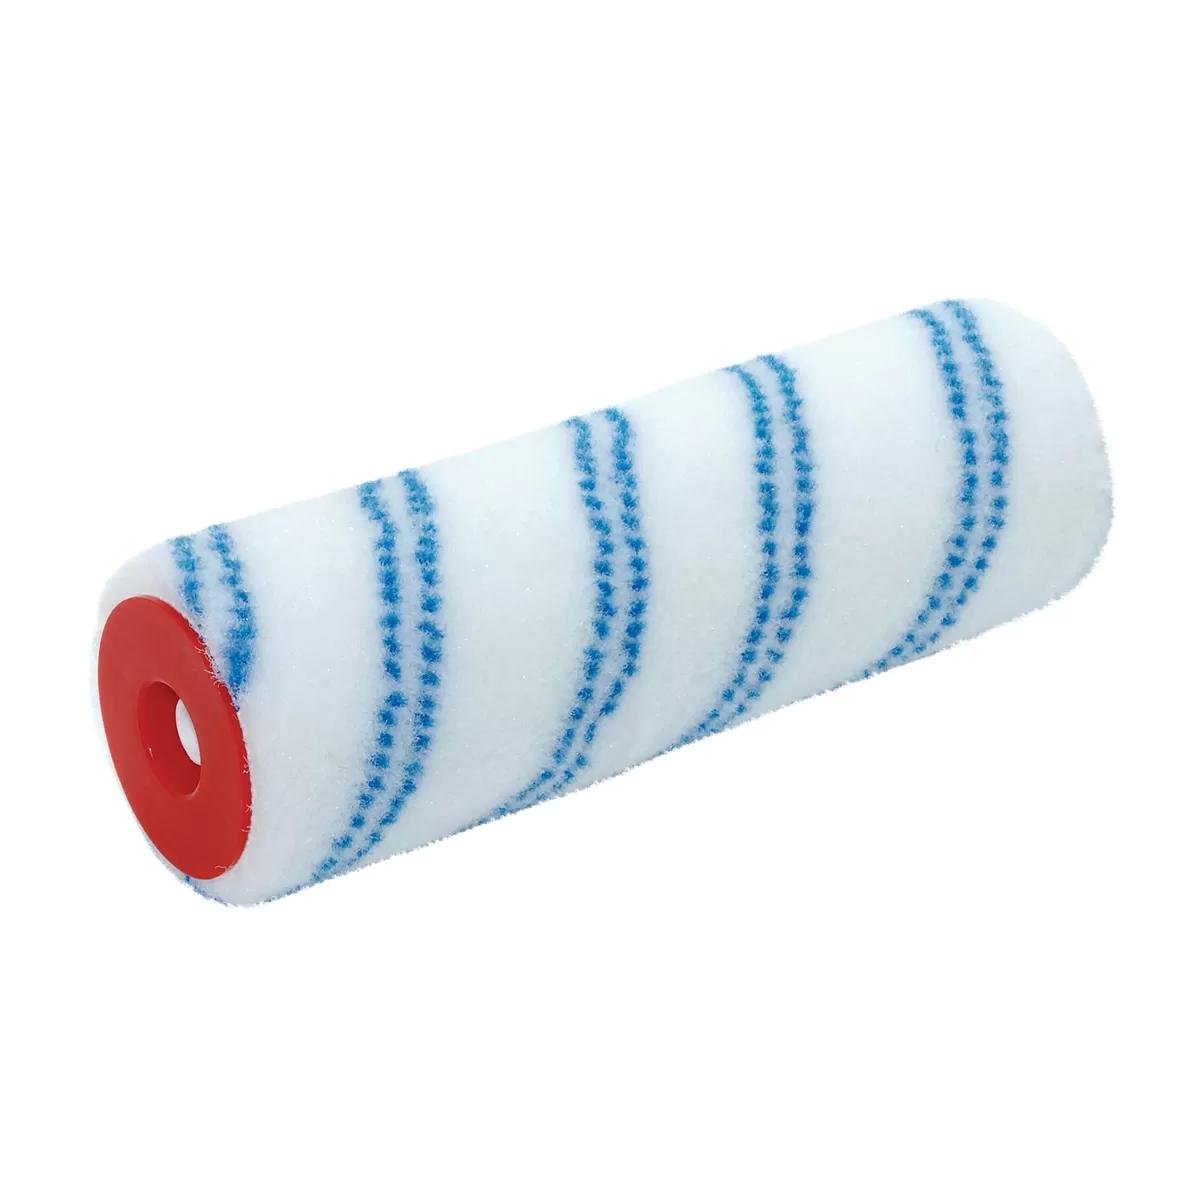 Paint roller Azzuro 18cm ø8 charge 